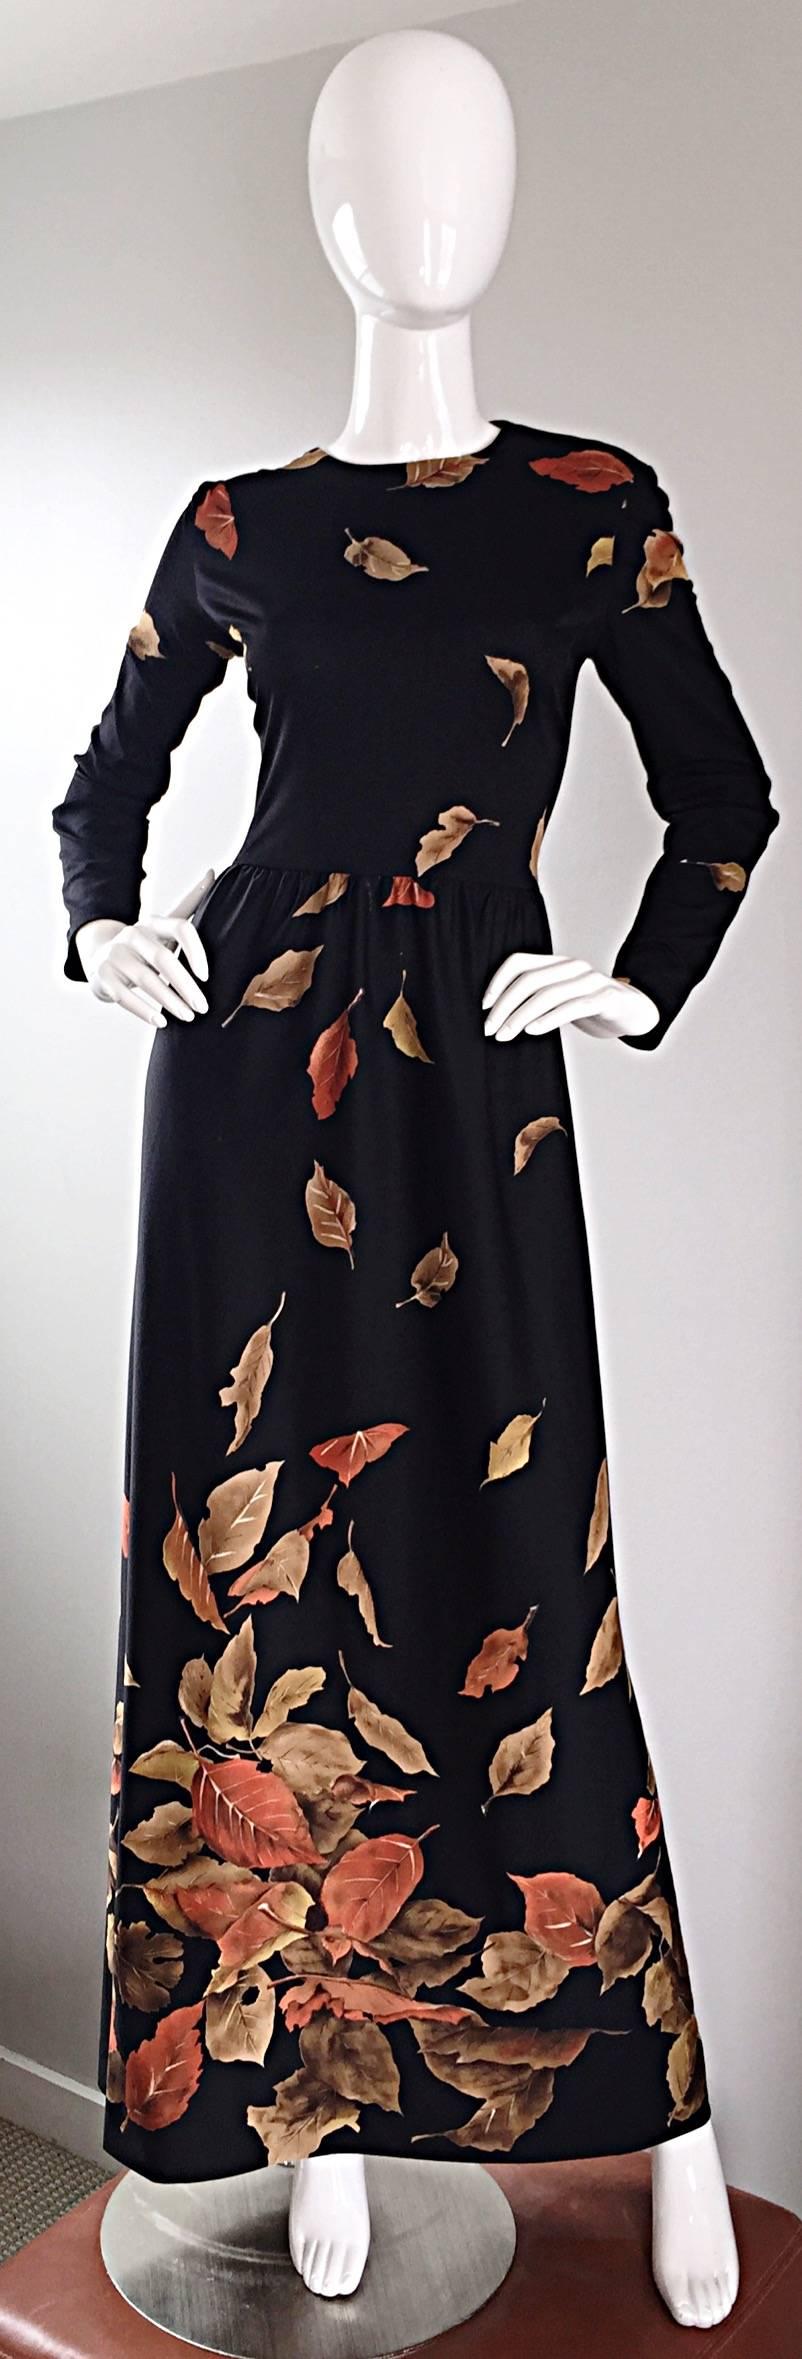 Whimsical 1970s YVES JENET black long sleeve jersey maxi dress, with 3D prints of leaves throughout! Sleek bodice with a full ankle length skirt. Full metal zipper up the back. Looks great alone or belted. Pairs nicely with flats, sandals, wedges or